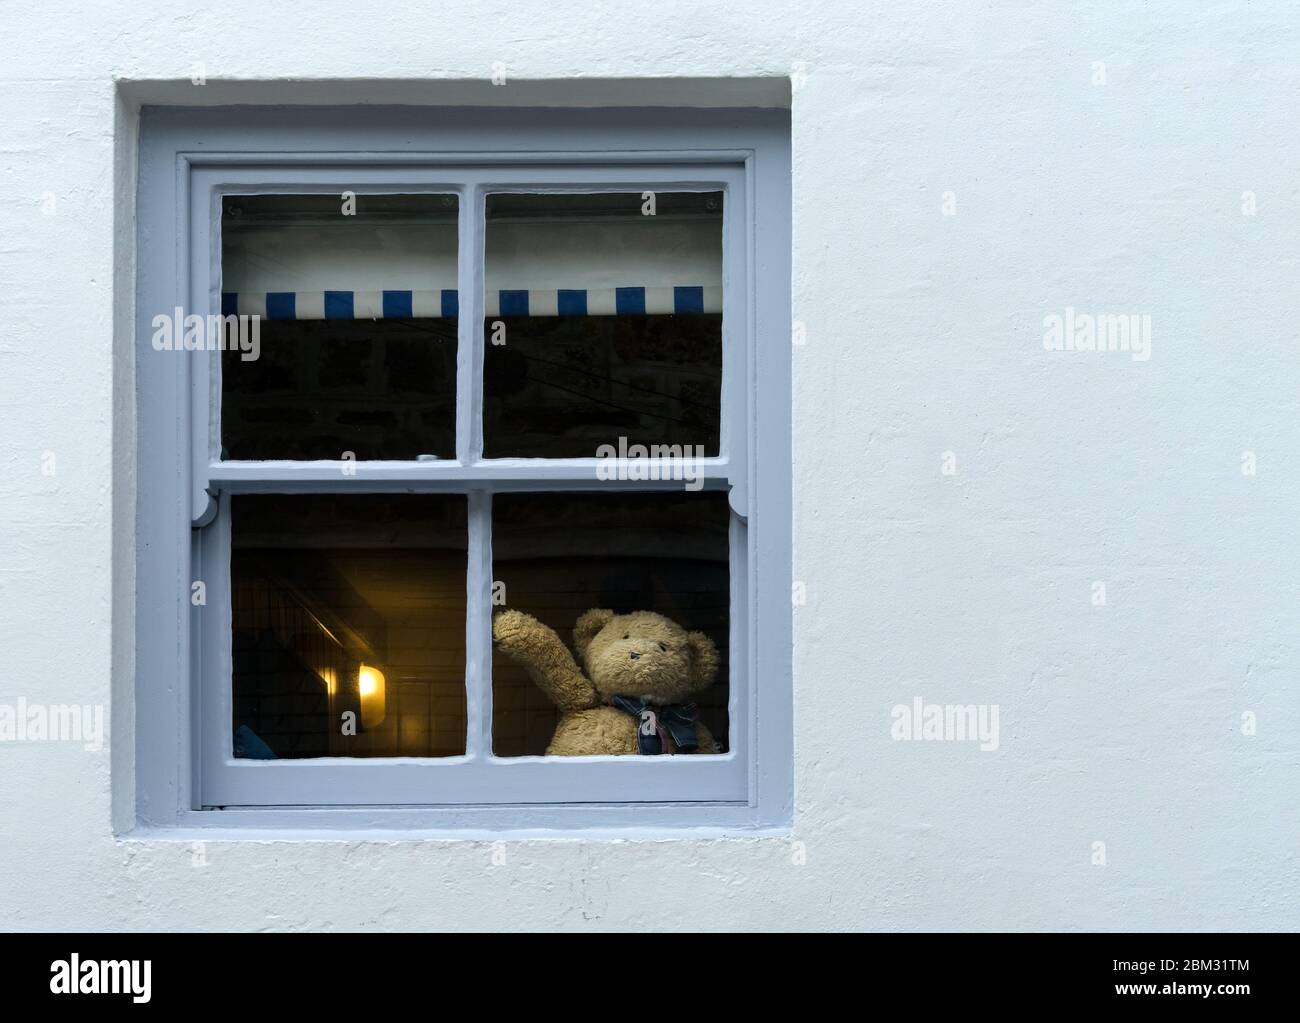 Cute teddy bear waving hello or goodbye from house window suggesting self isolation or social distancing during corona virus covid19 pandemic Stock Photo